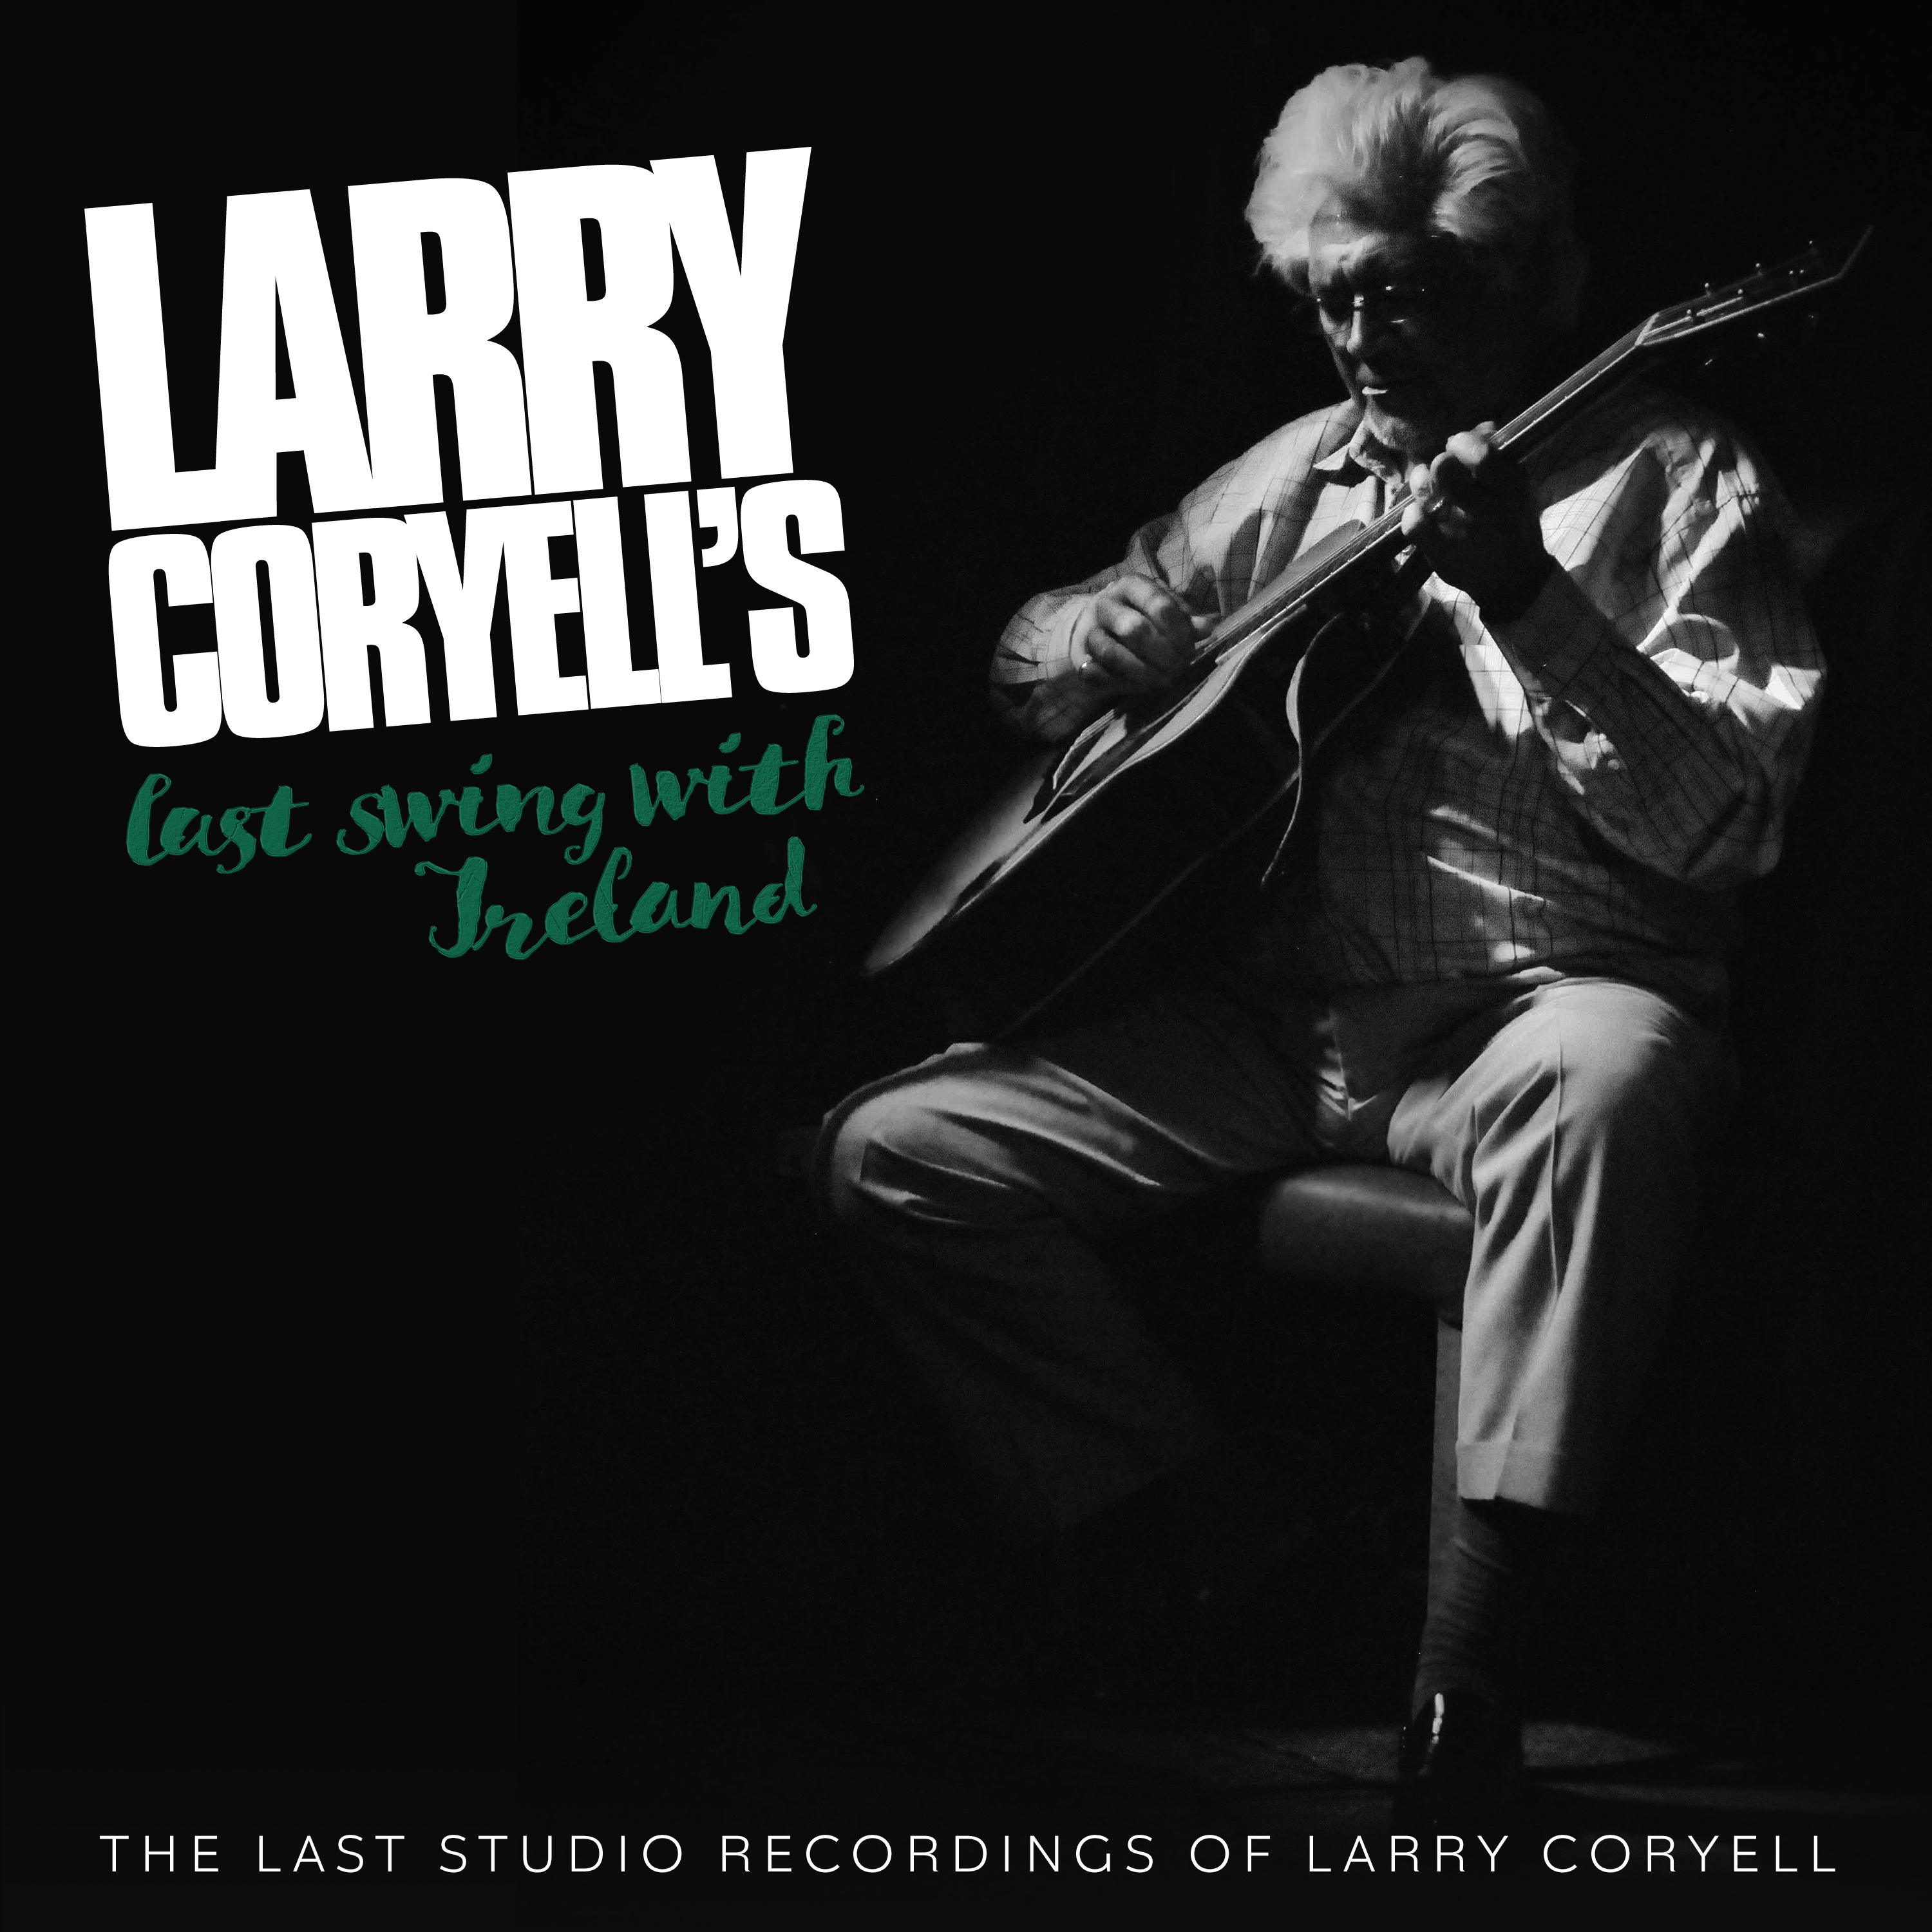 Larry Coryell - Larry Coryell's Last Swing With Ire - CD